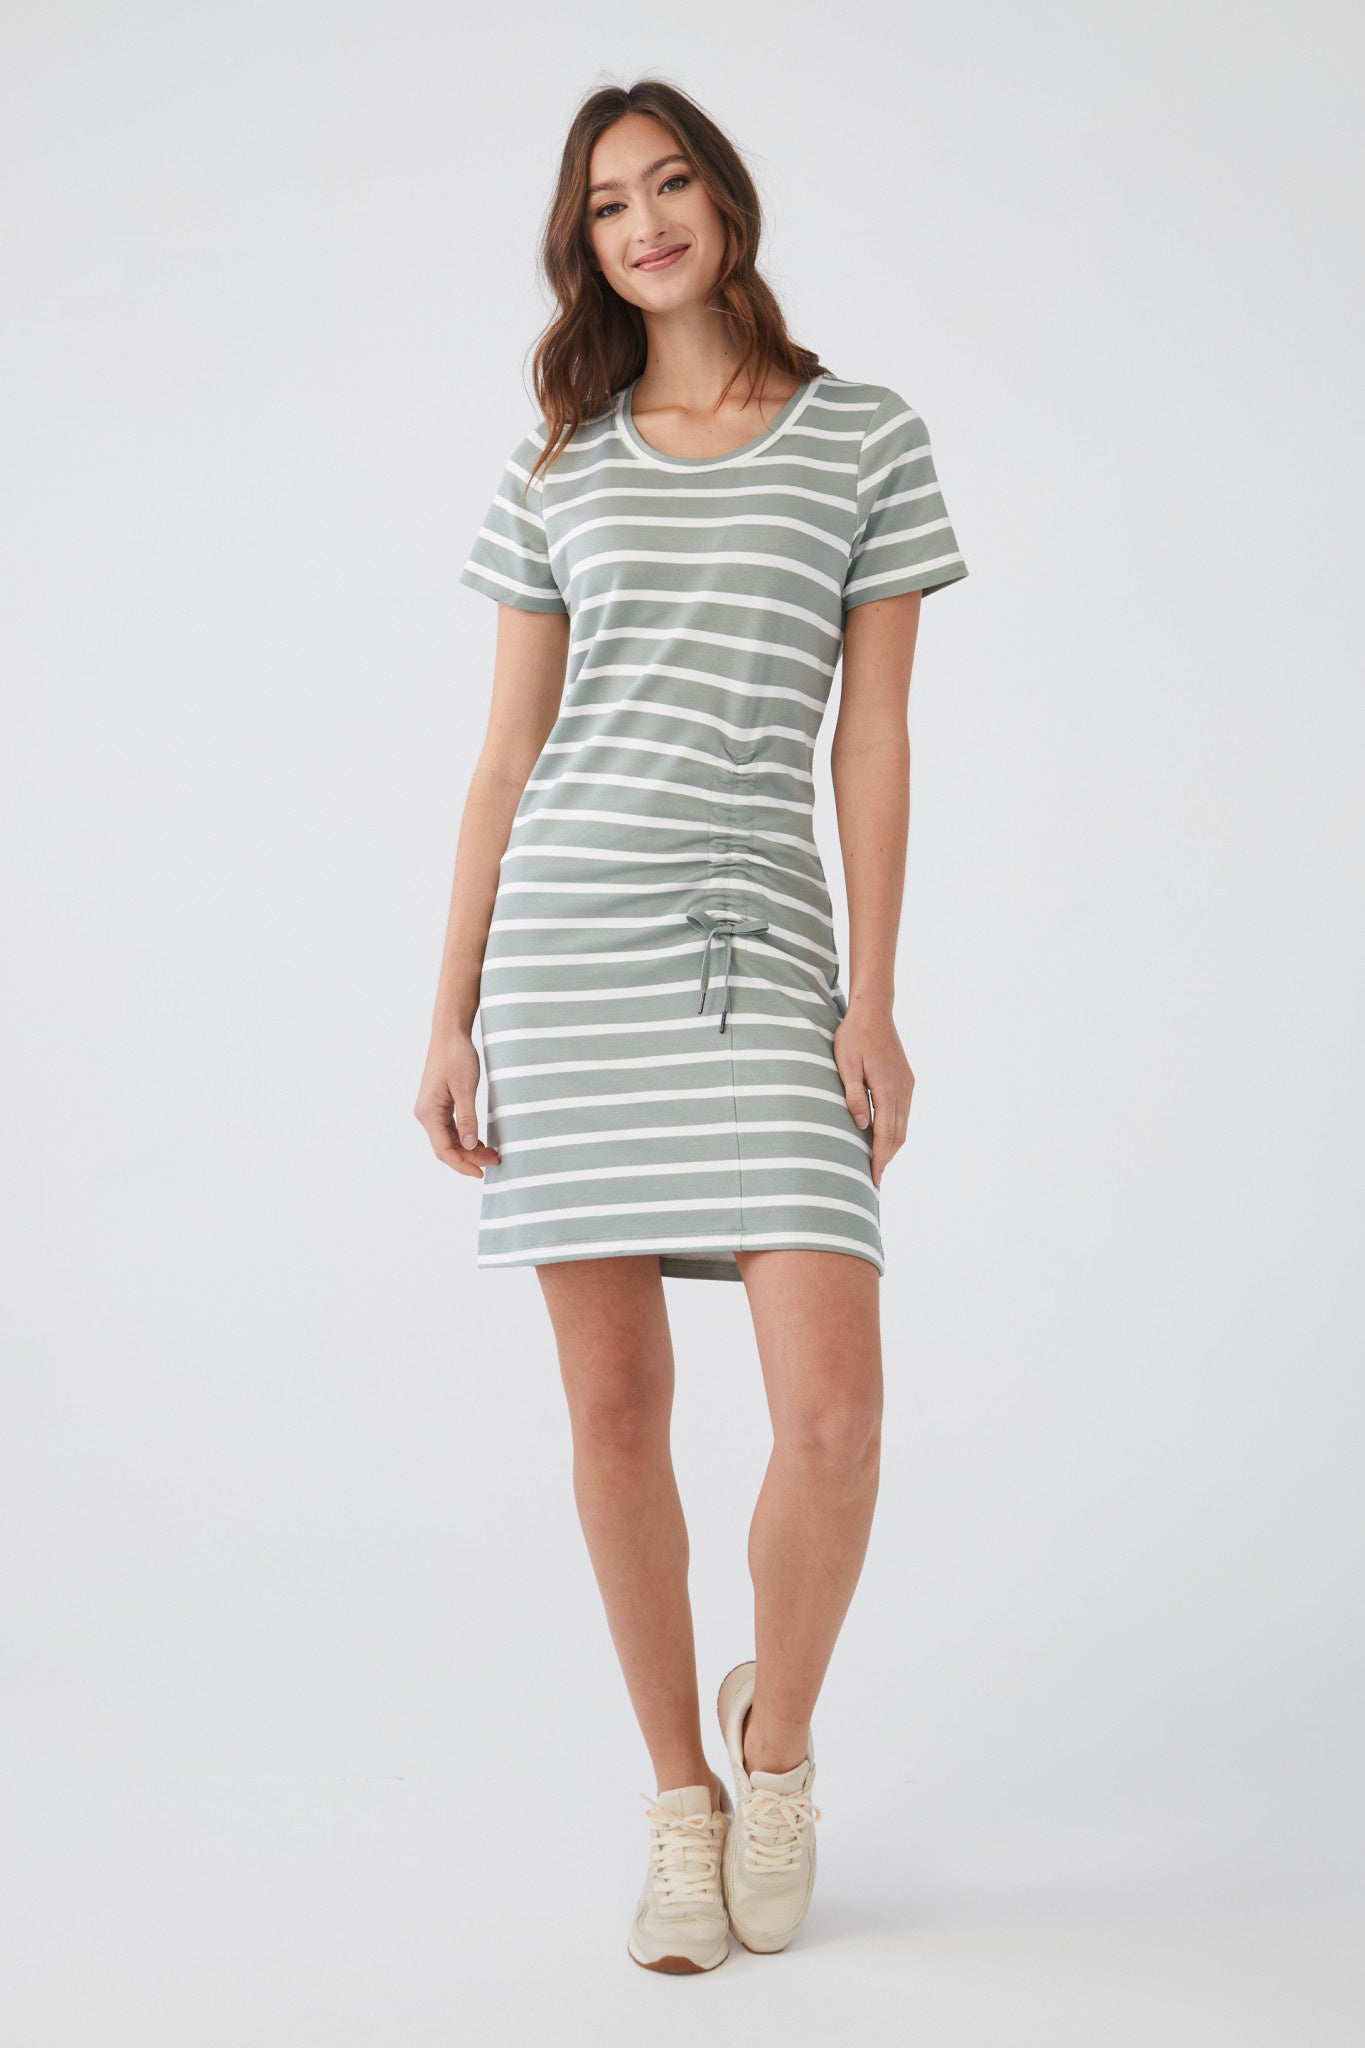 Ruched Dress Short Sleeve 7049834